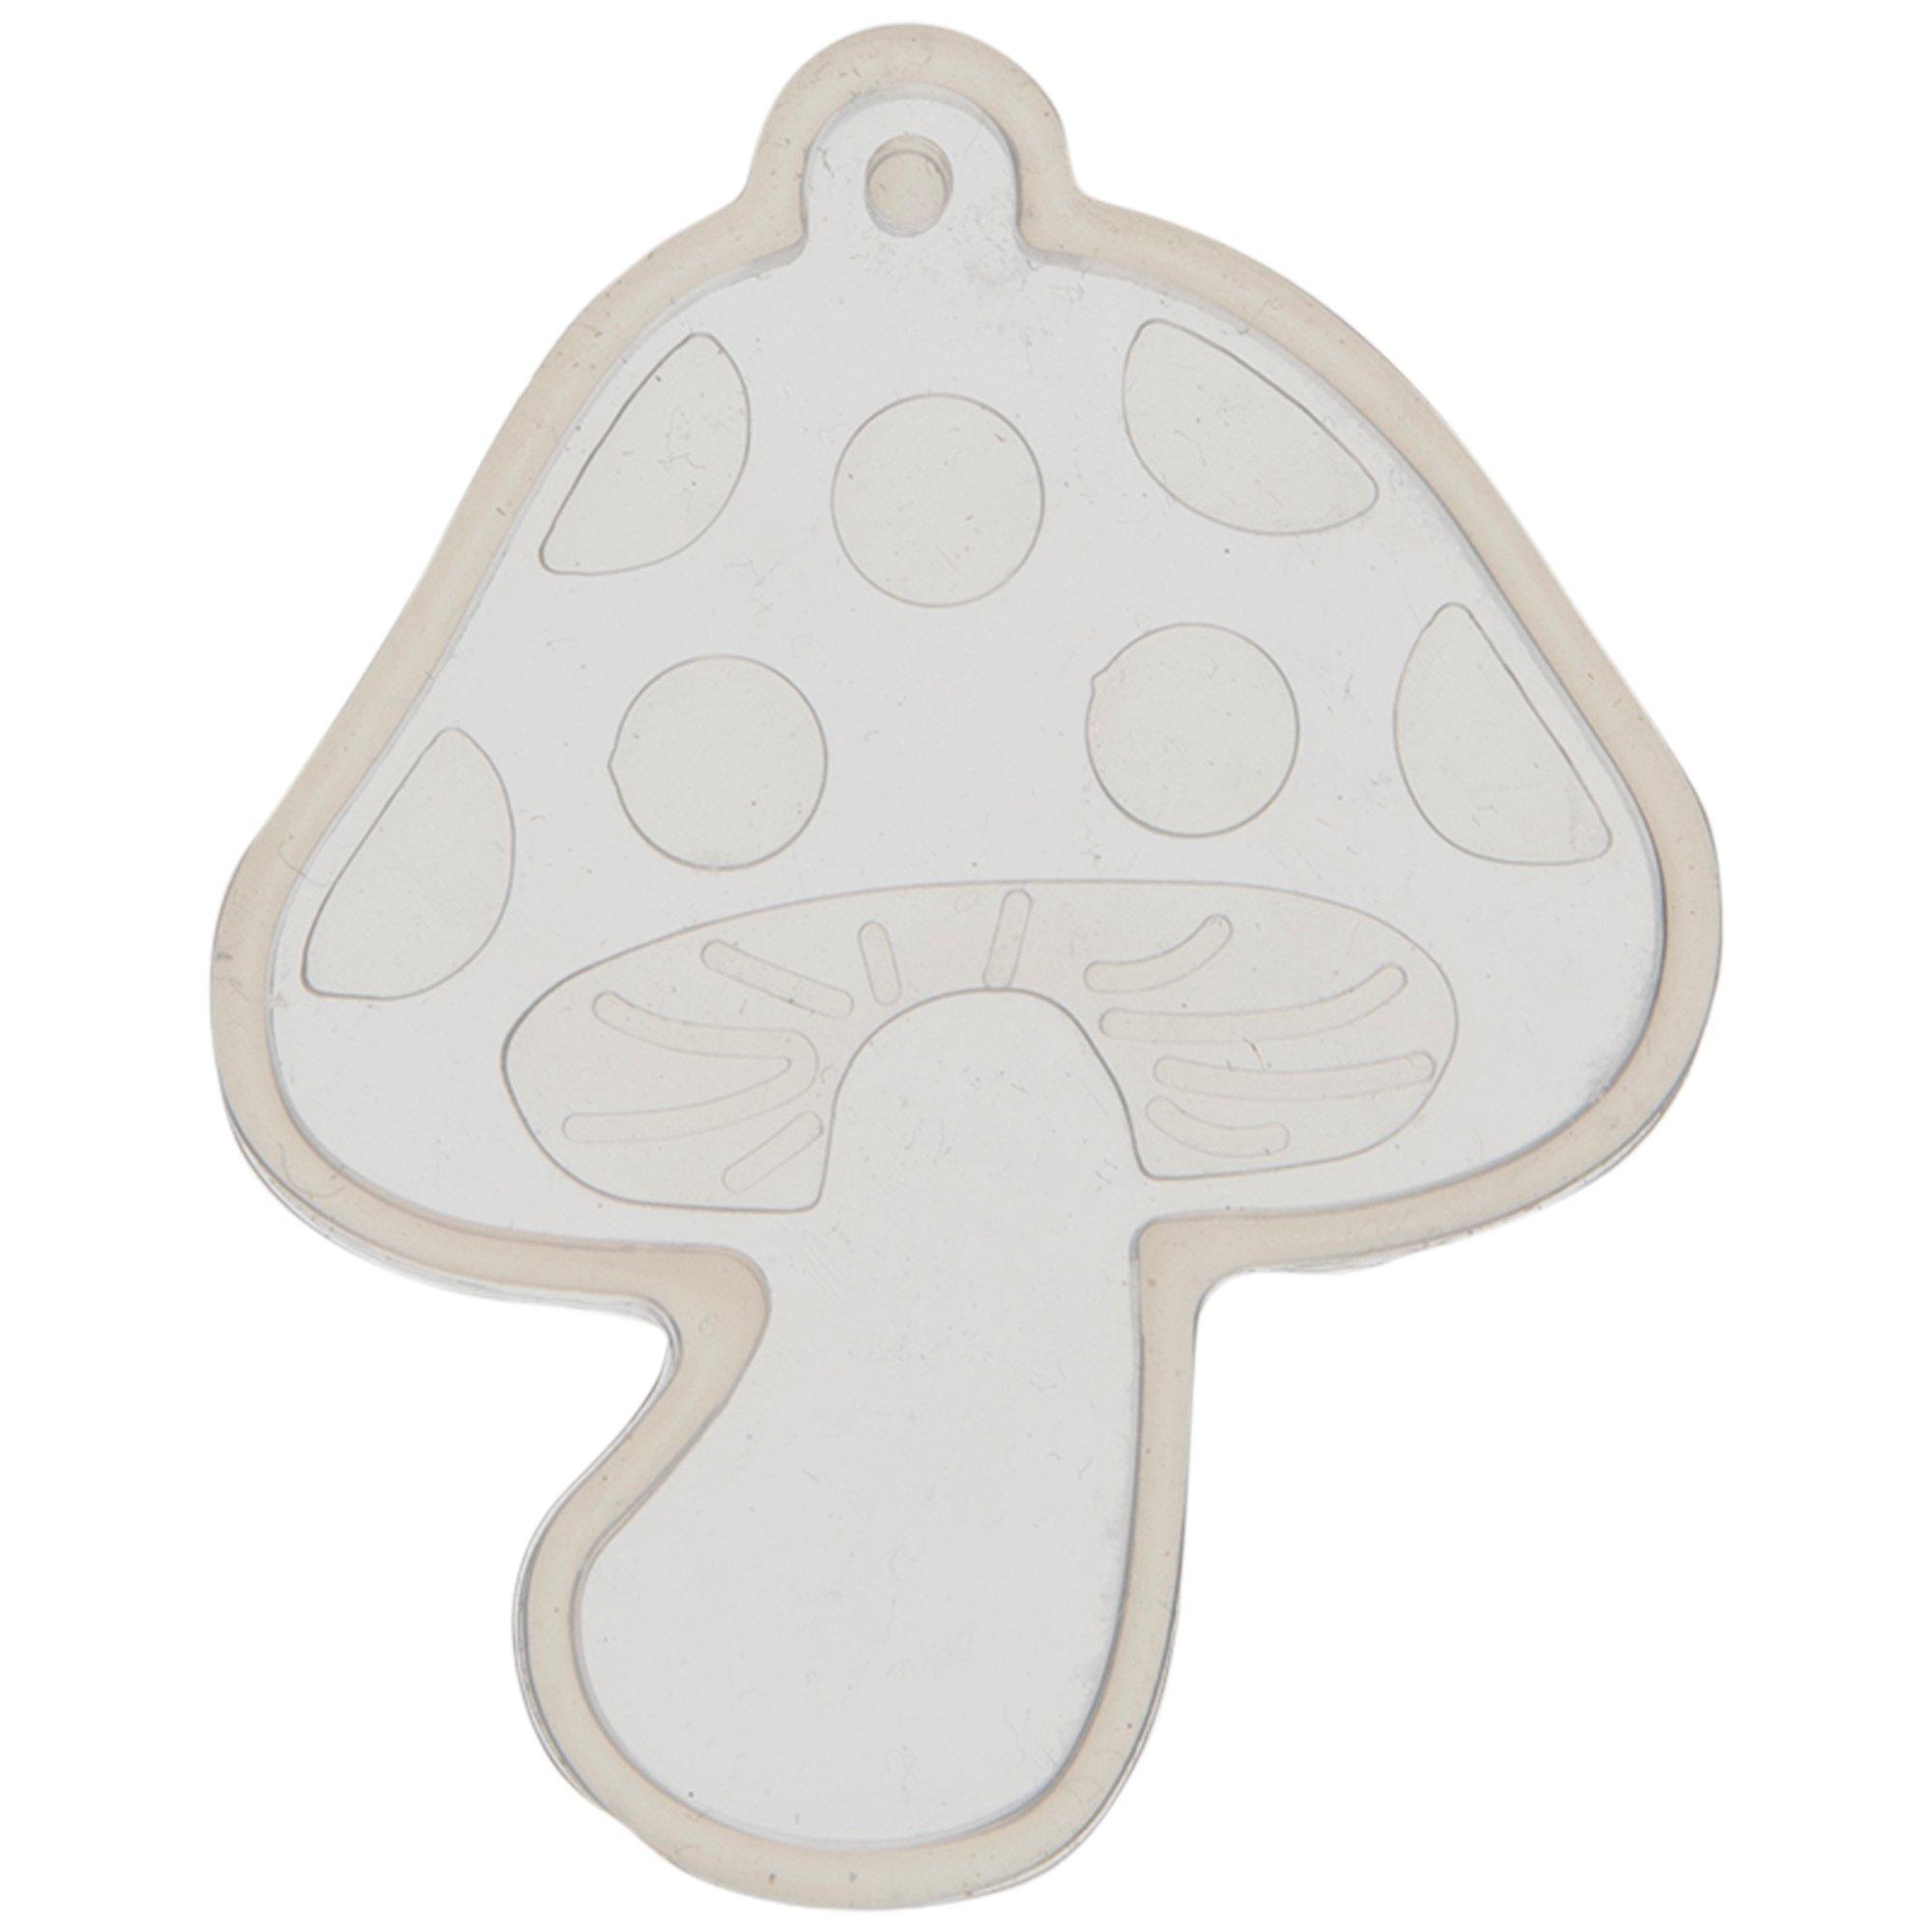 4 pieces mushroom shaped silicone molds